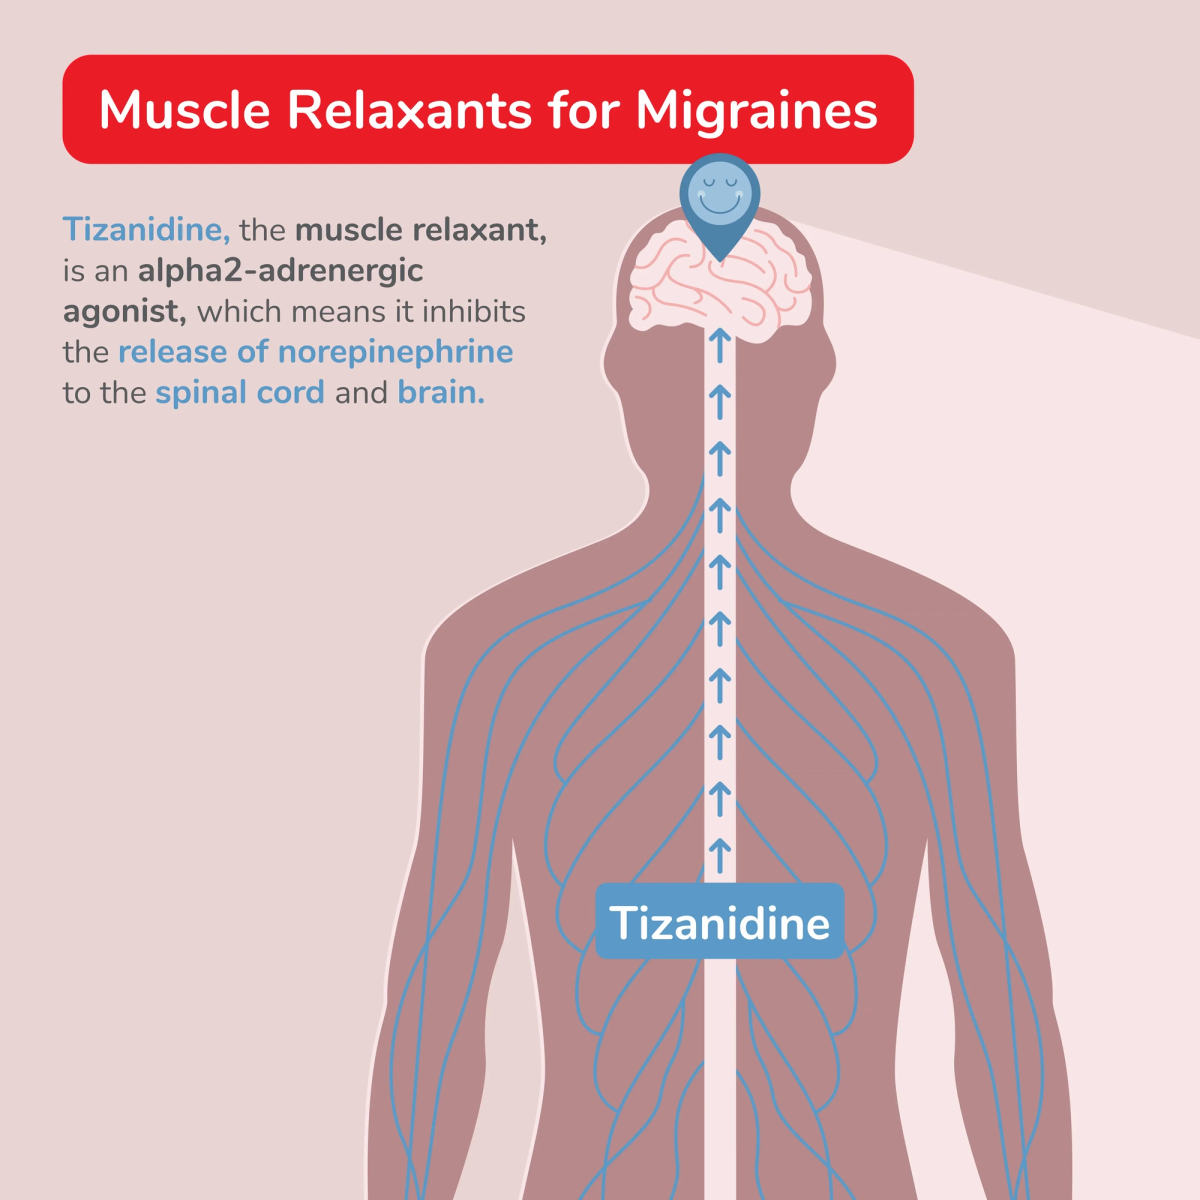 Illustration of Tizanidine Inhibiting the Release of Norepinephrine to the Spinal Cord and Brain